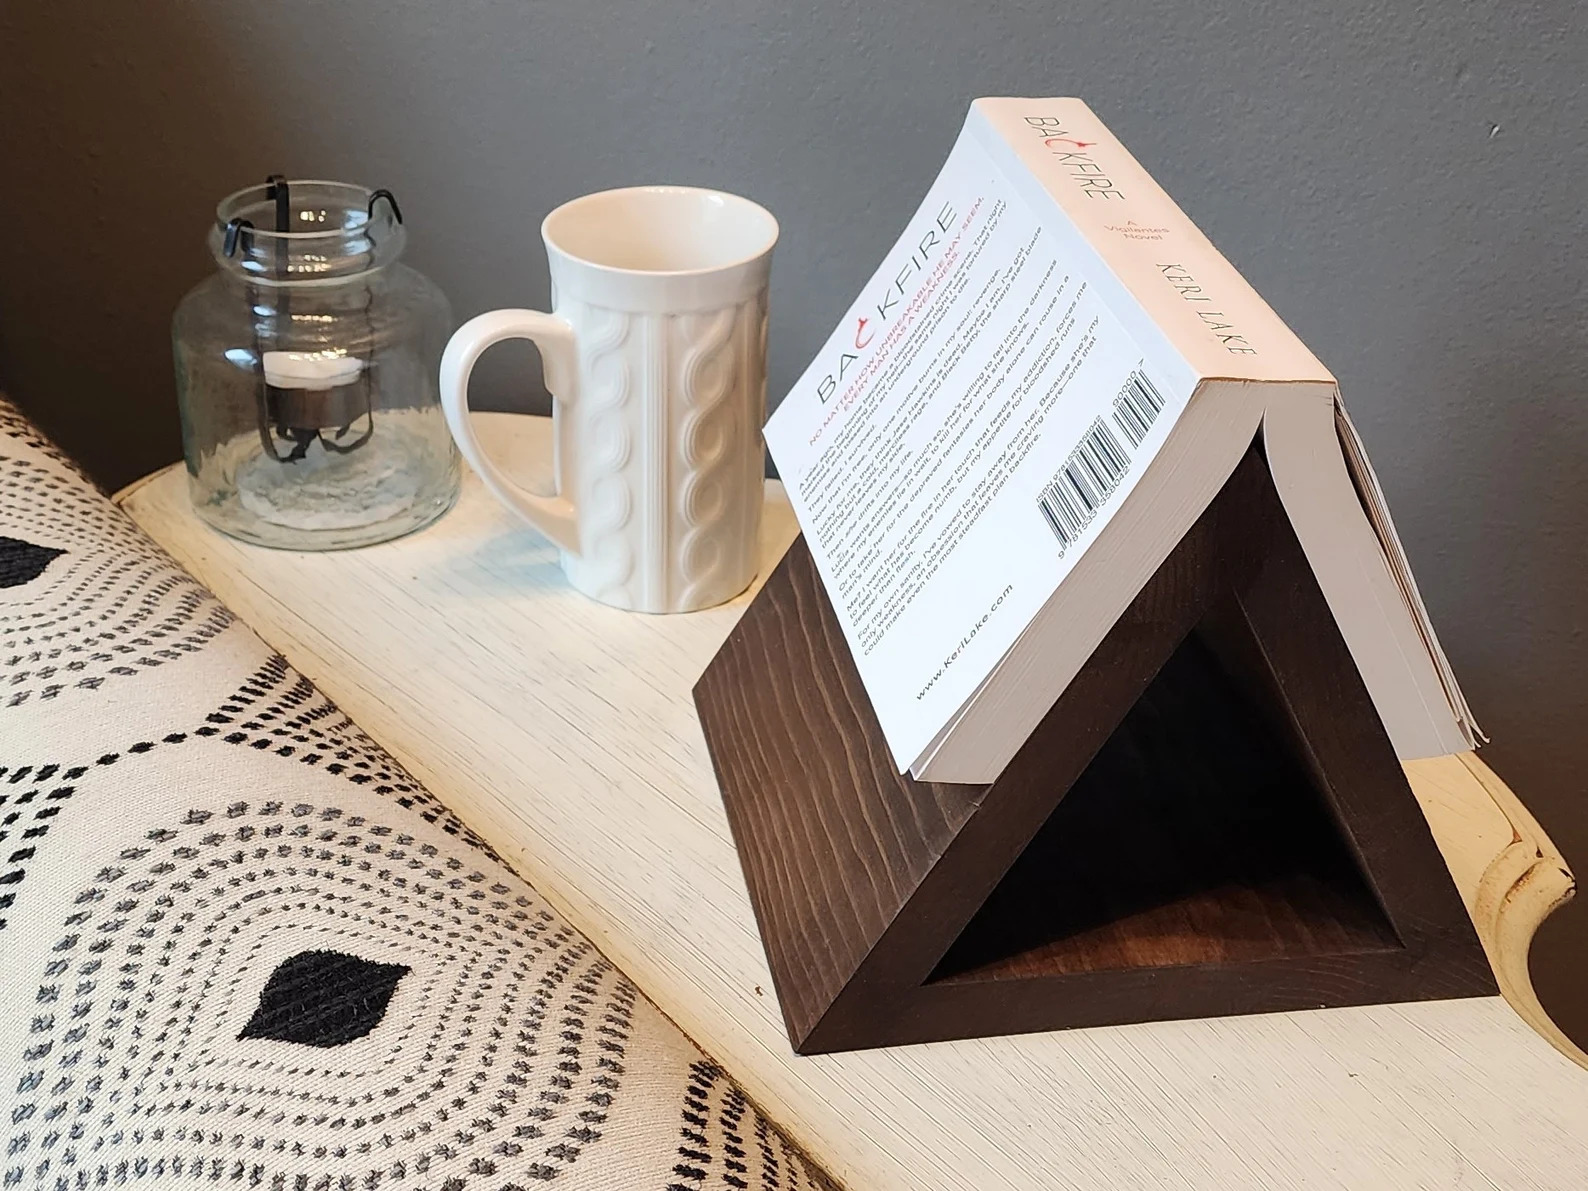 15 Clever Book Rest Designs That Will Help You Stay Organized